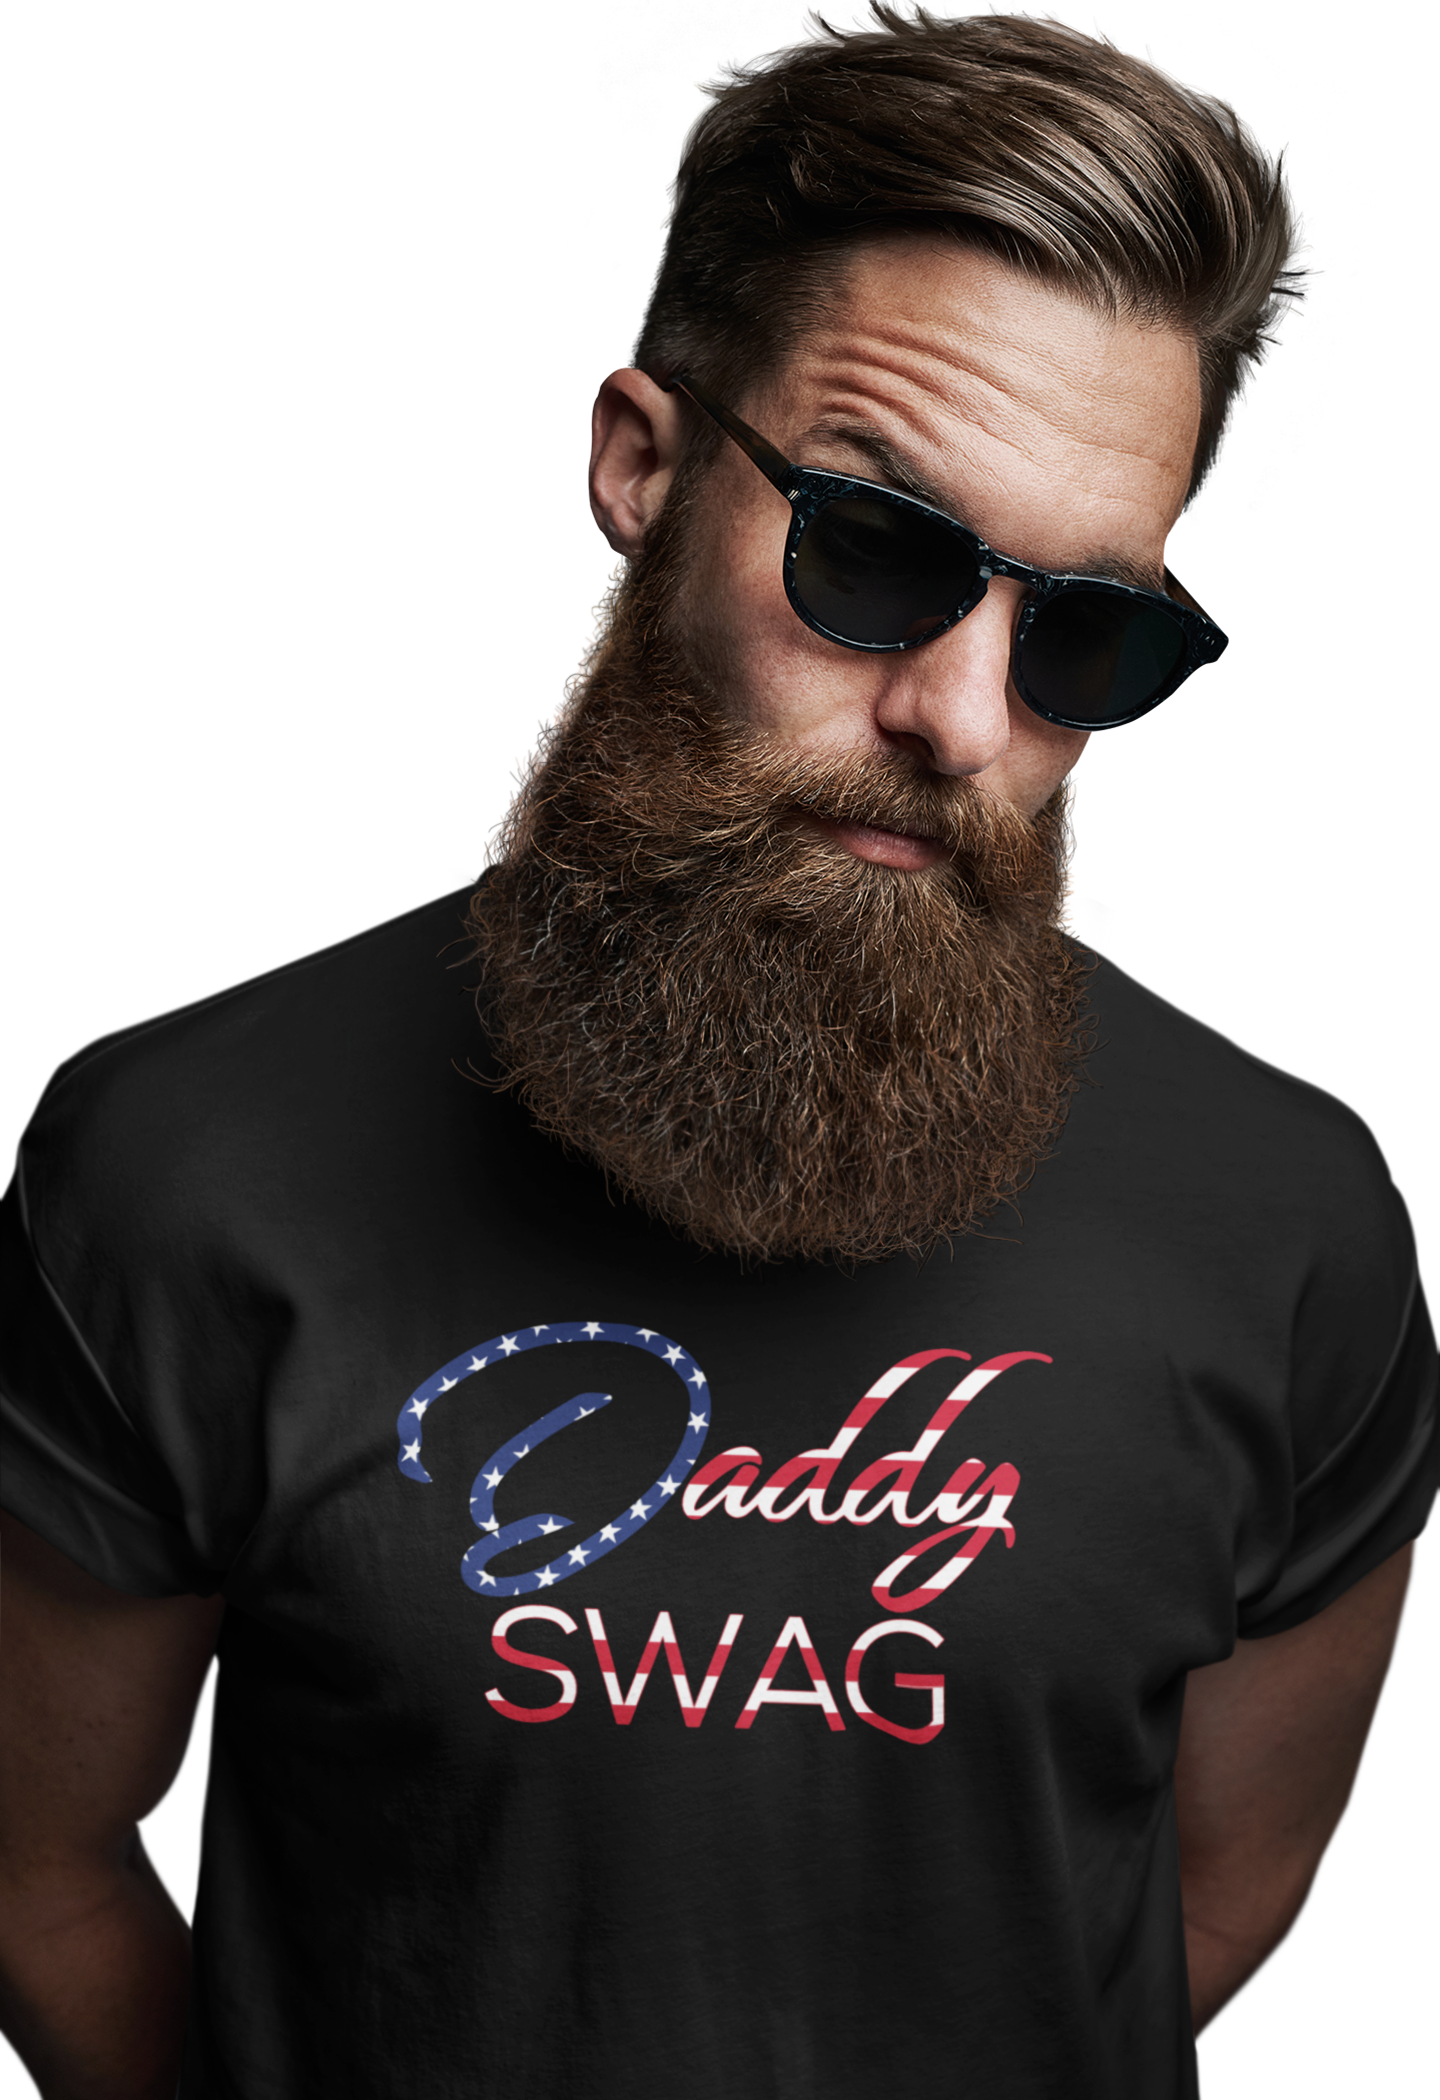 DADDY SWAG SIGNATURE COLLECTION T-SHIRT